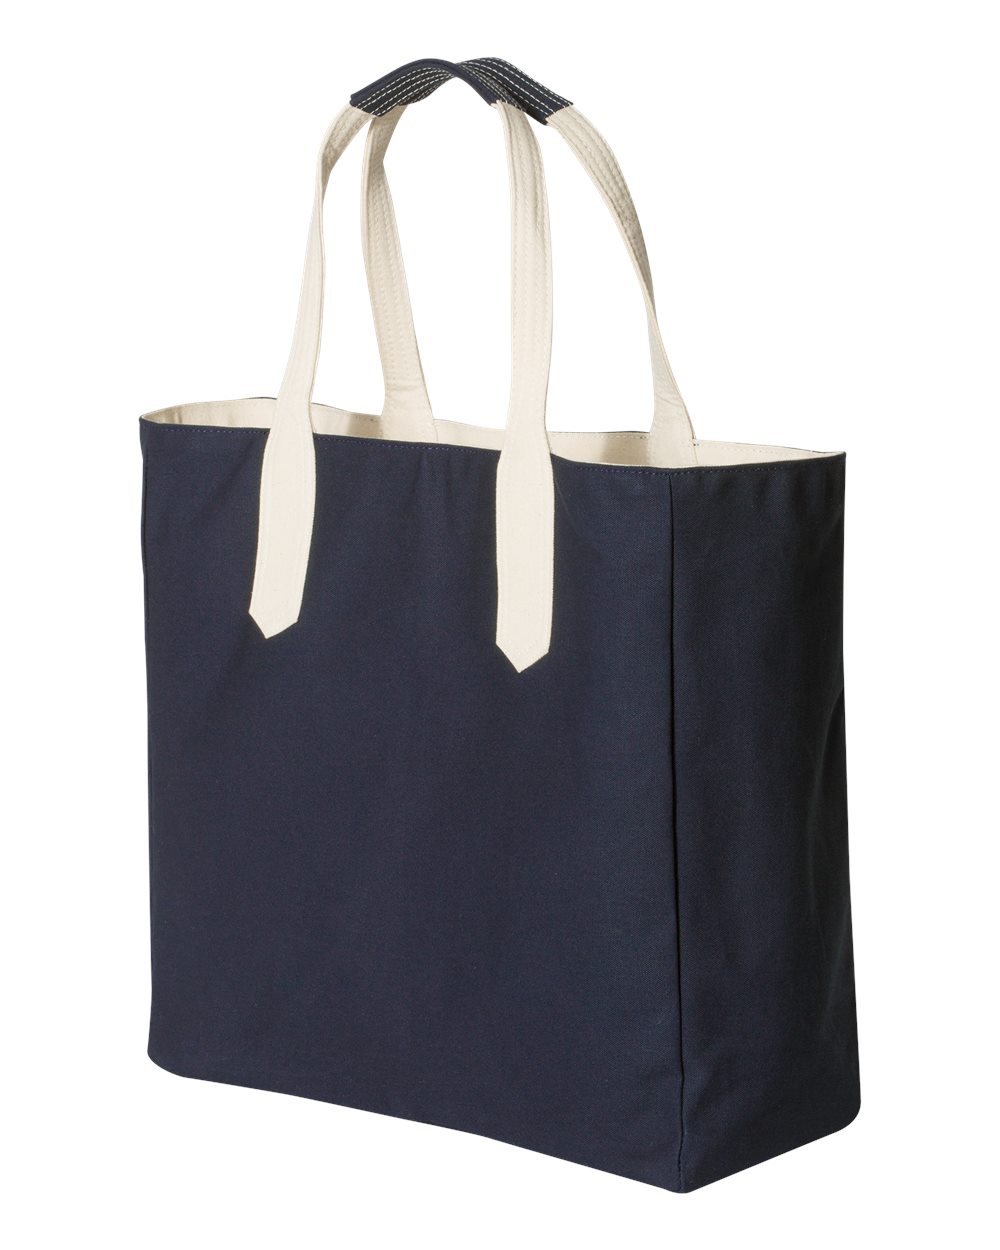 Brookson Bay BB500 - Solid Tote with Contrast Handles $17.15 - Bags